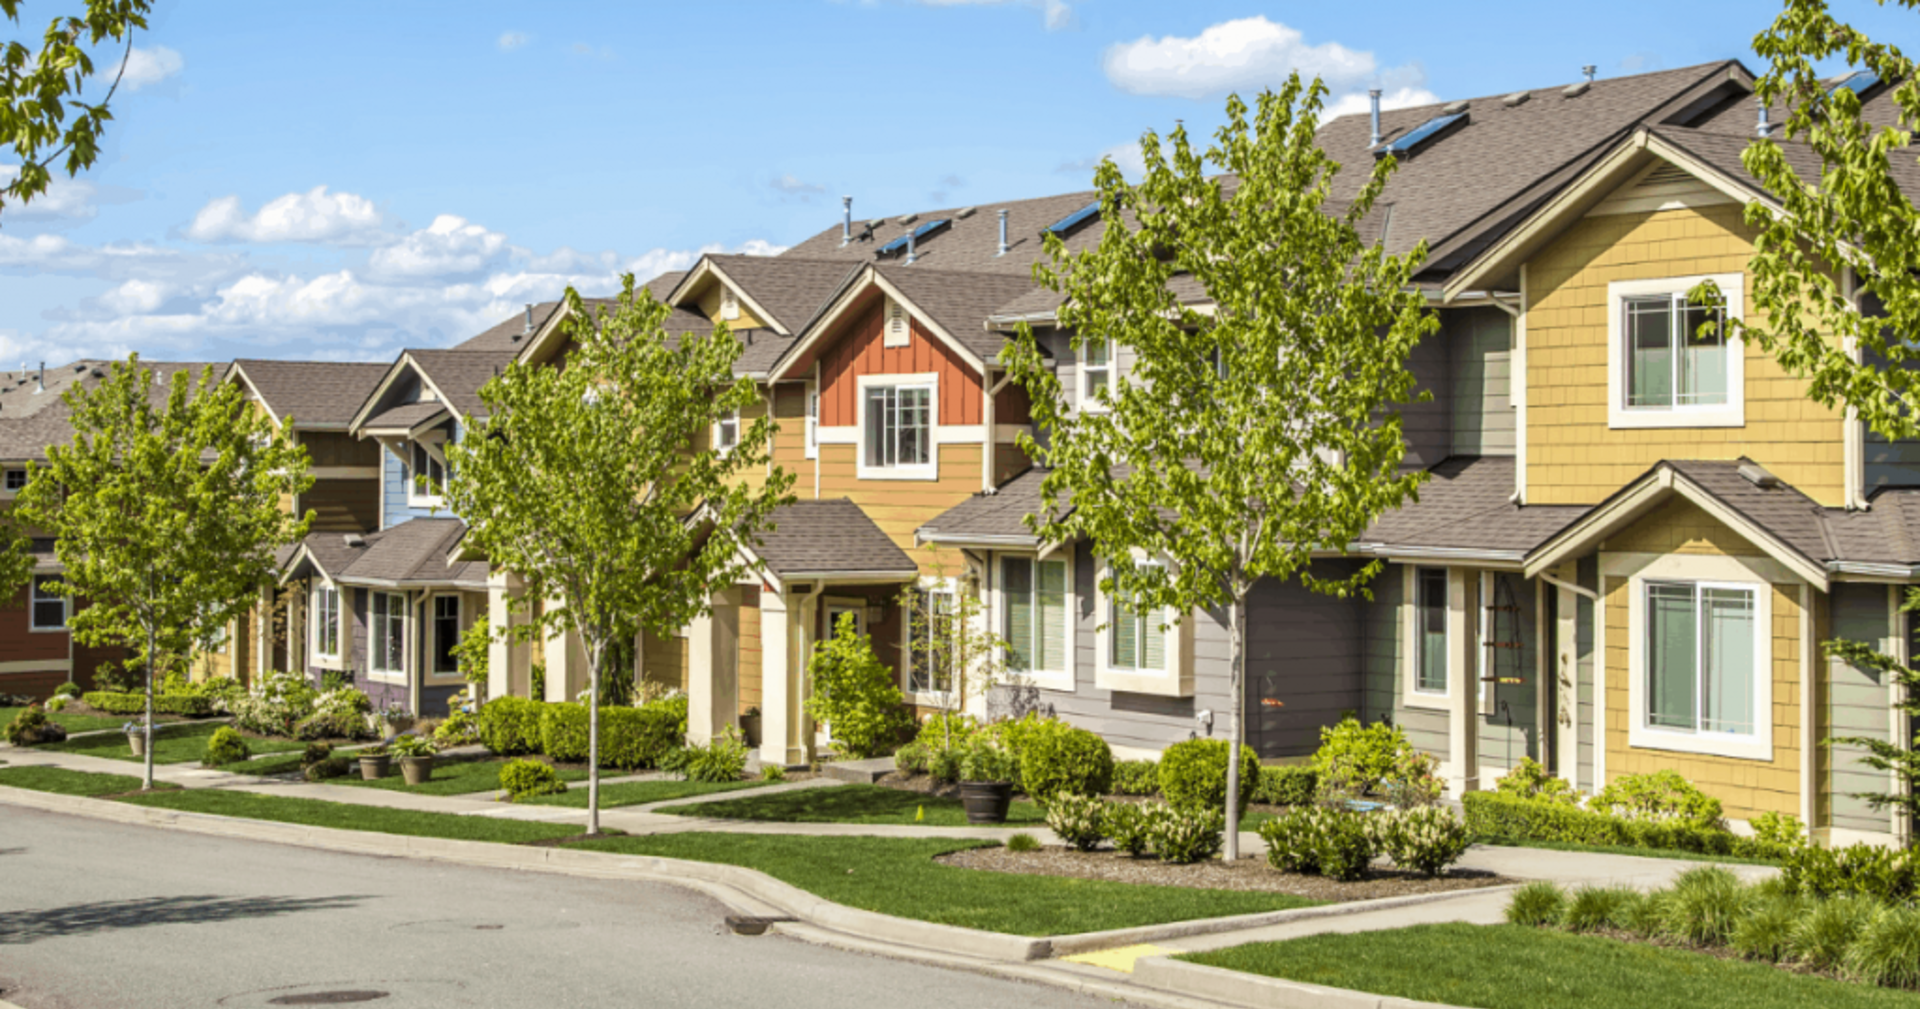 What Exactly Is An HOA?